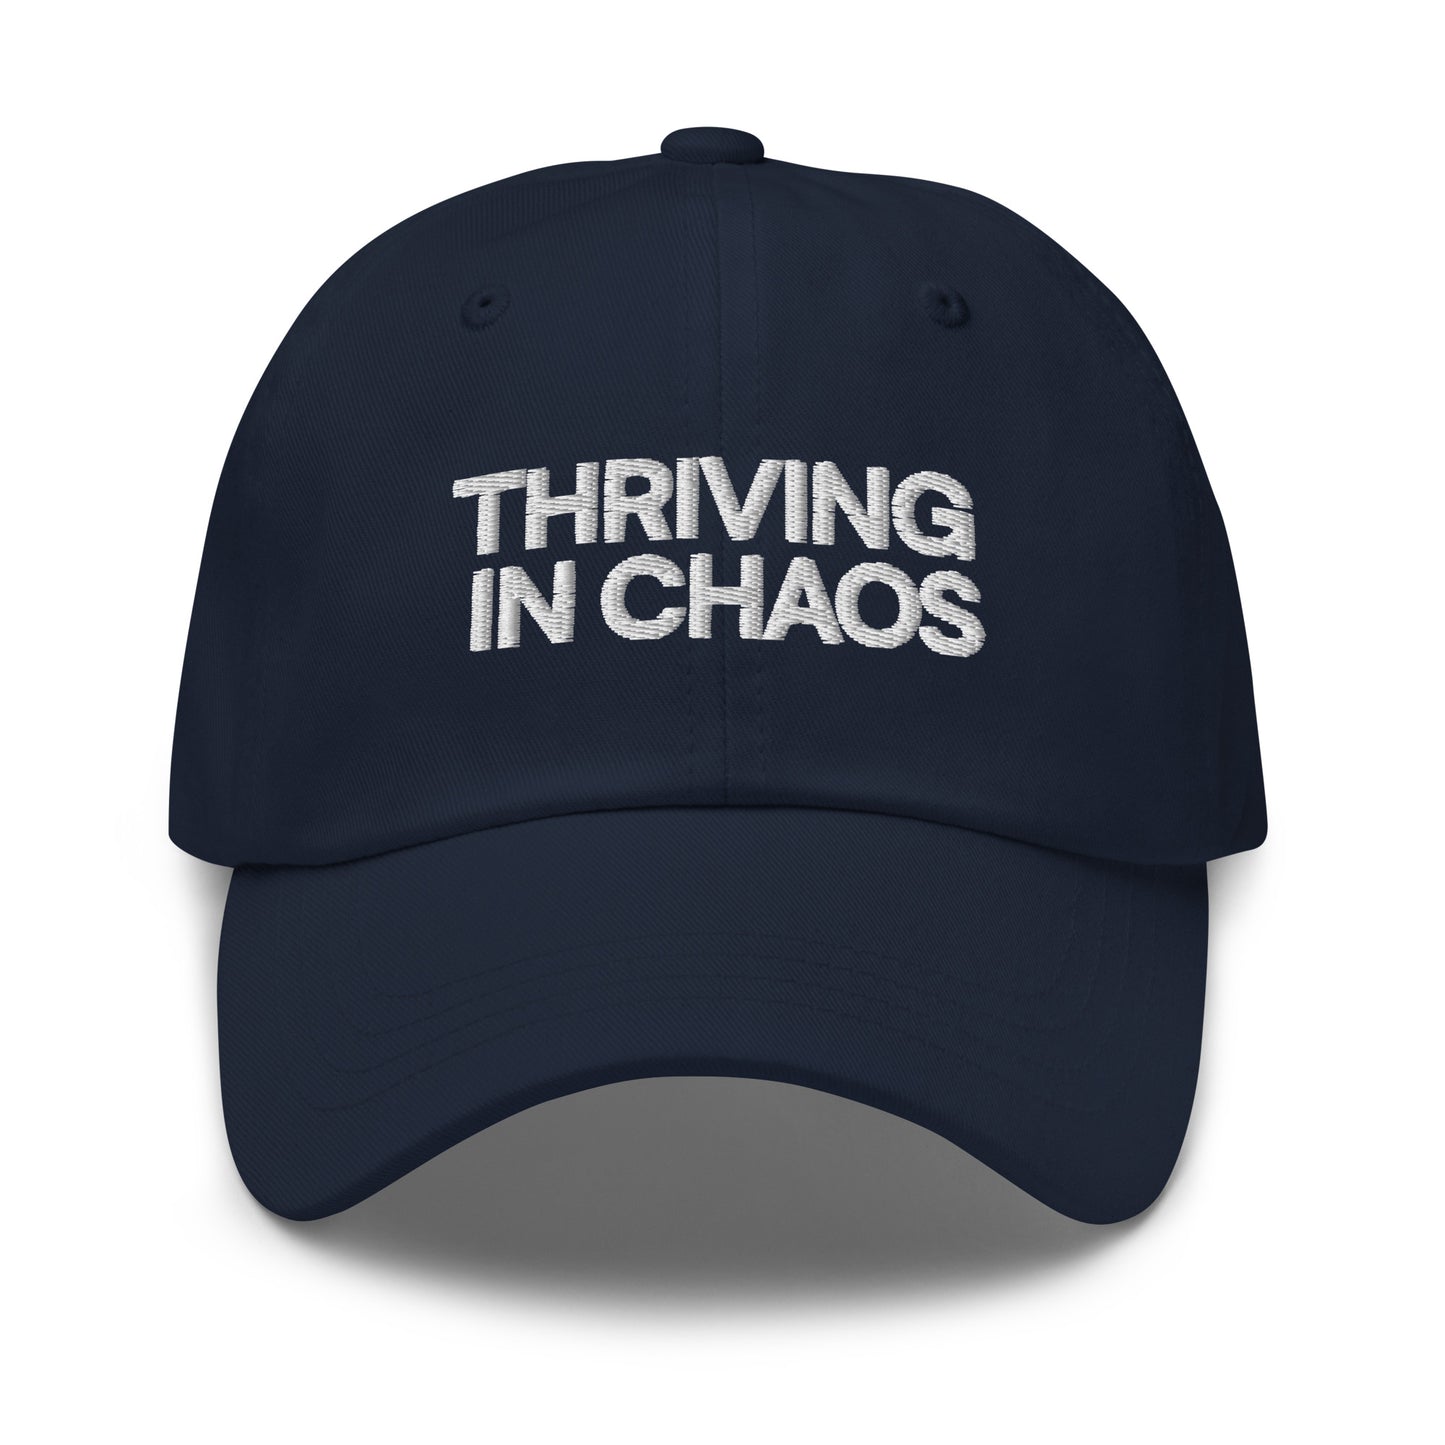 THRIVING IN CHAOS (GREEN HAT)